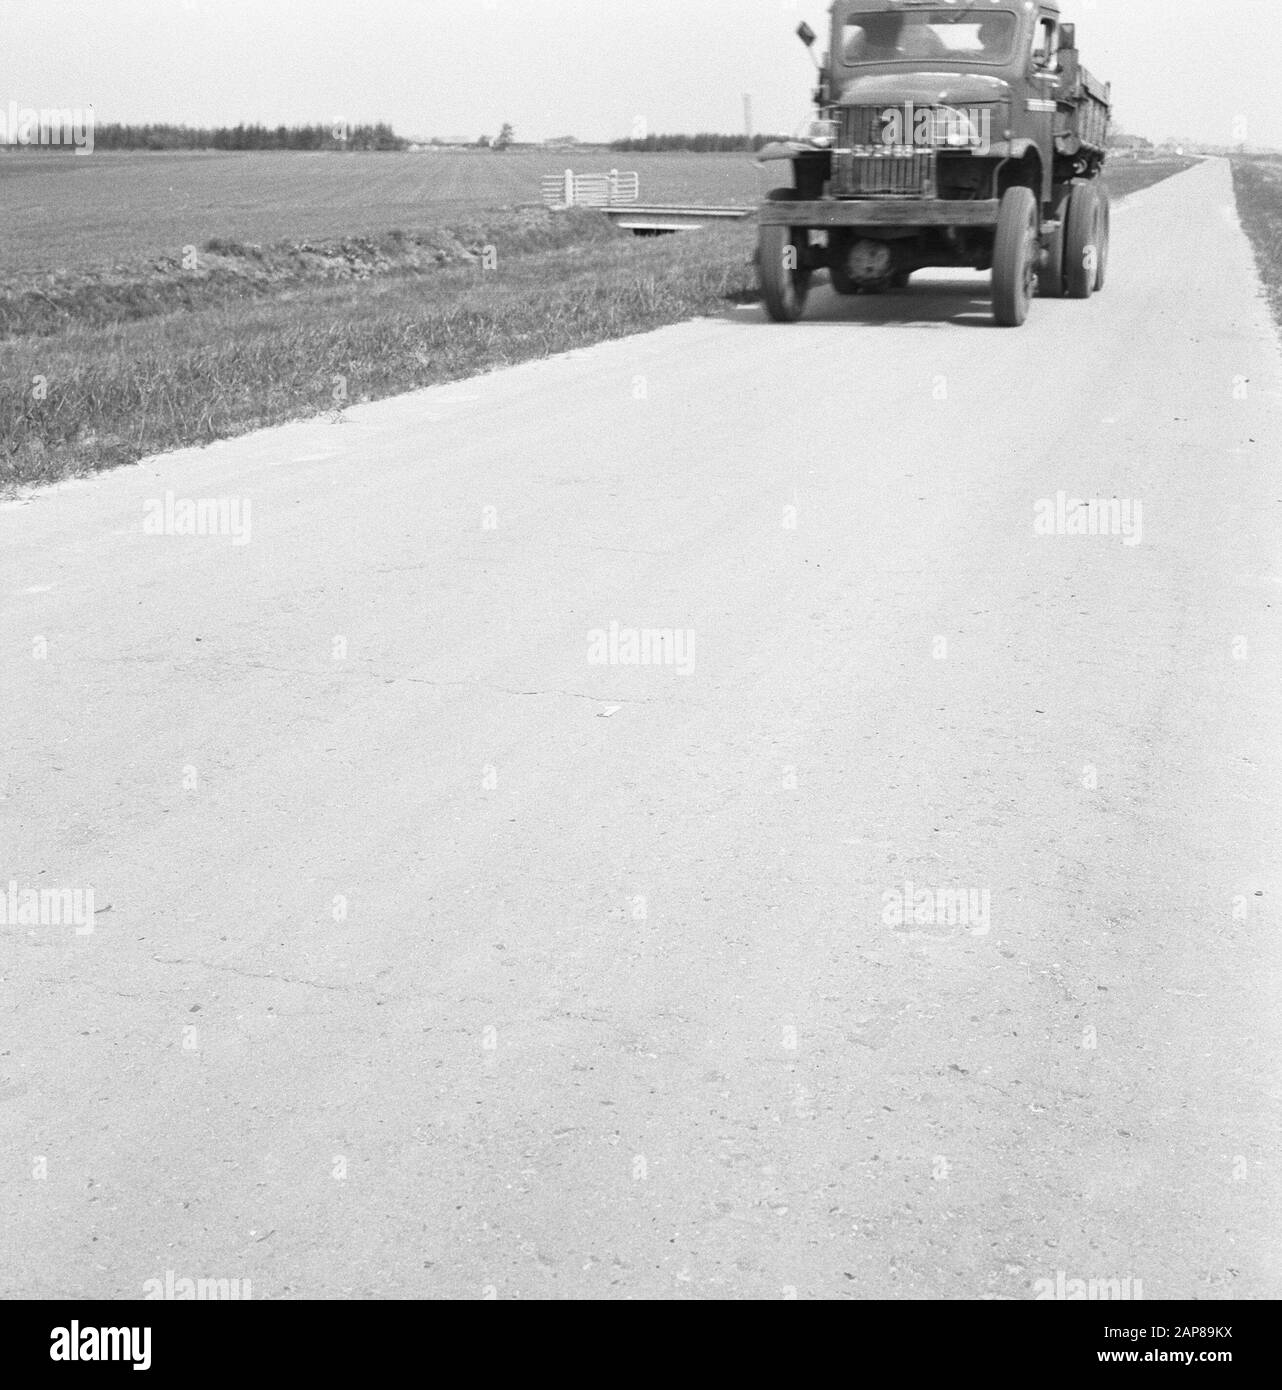 construction and improvement of roads, dikes and savings basins, parallel roads, trucks, national road 17 Date: May 1963 Keywords: construction and improvement of roads, dikes and savings basin, parallel roads, trucks Personal name: national road 17 Stock Photo